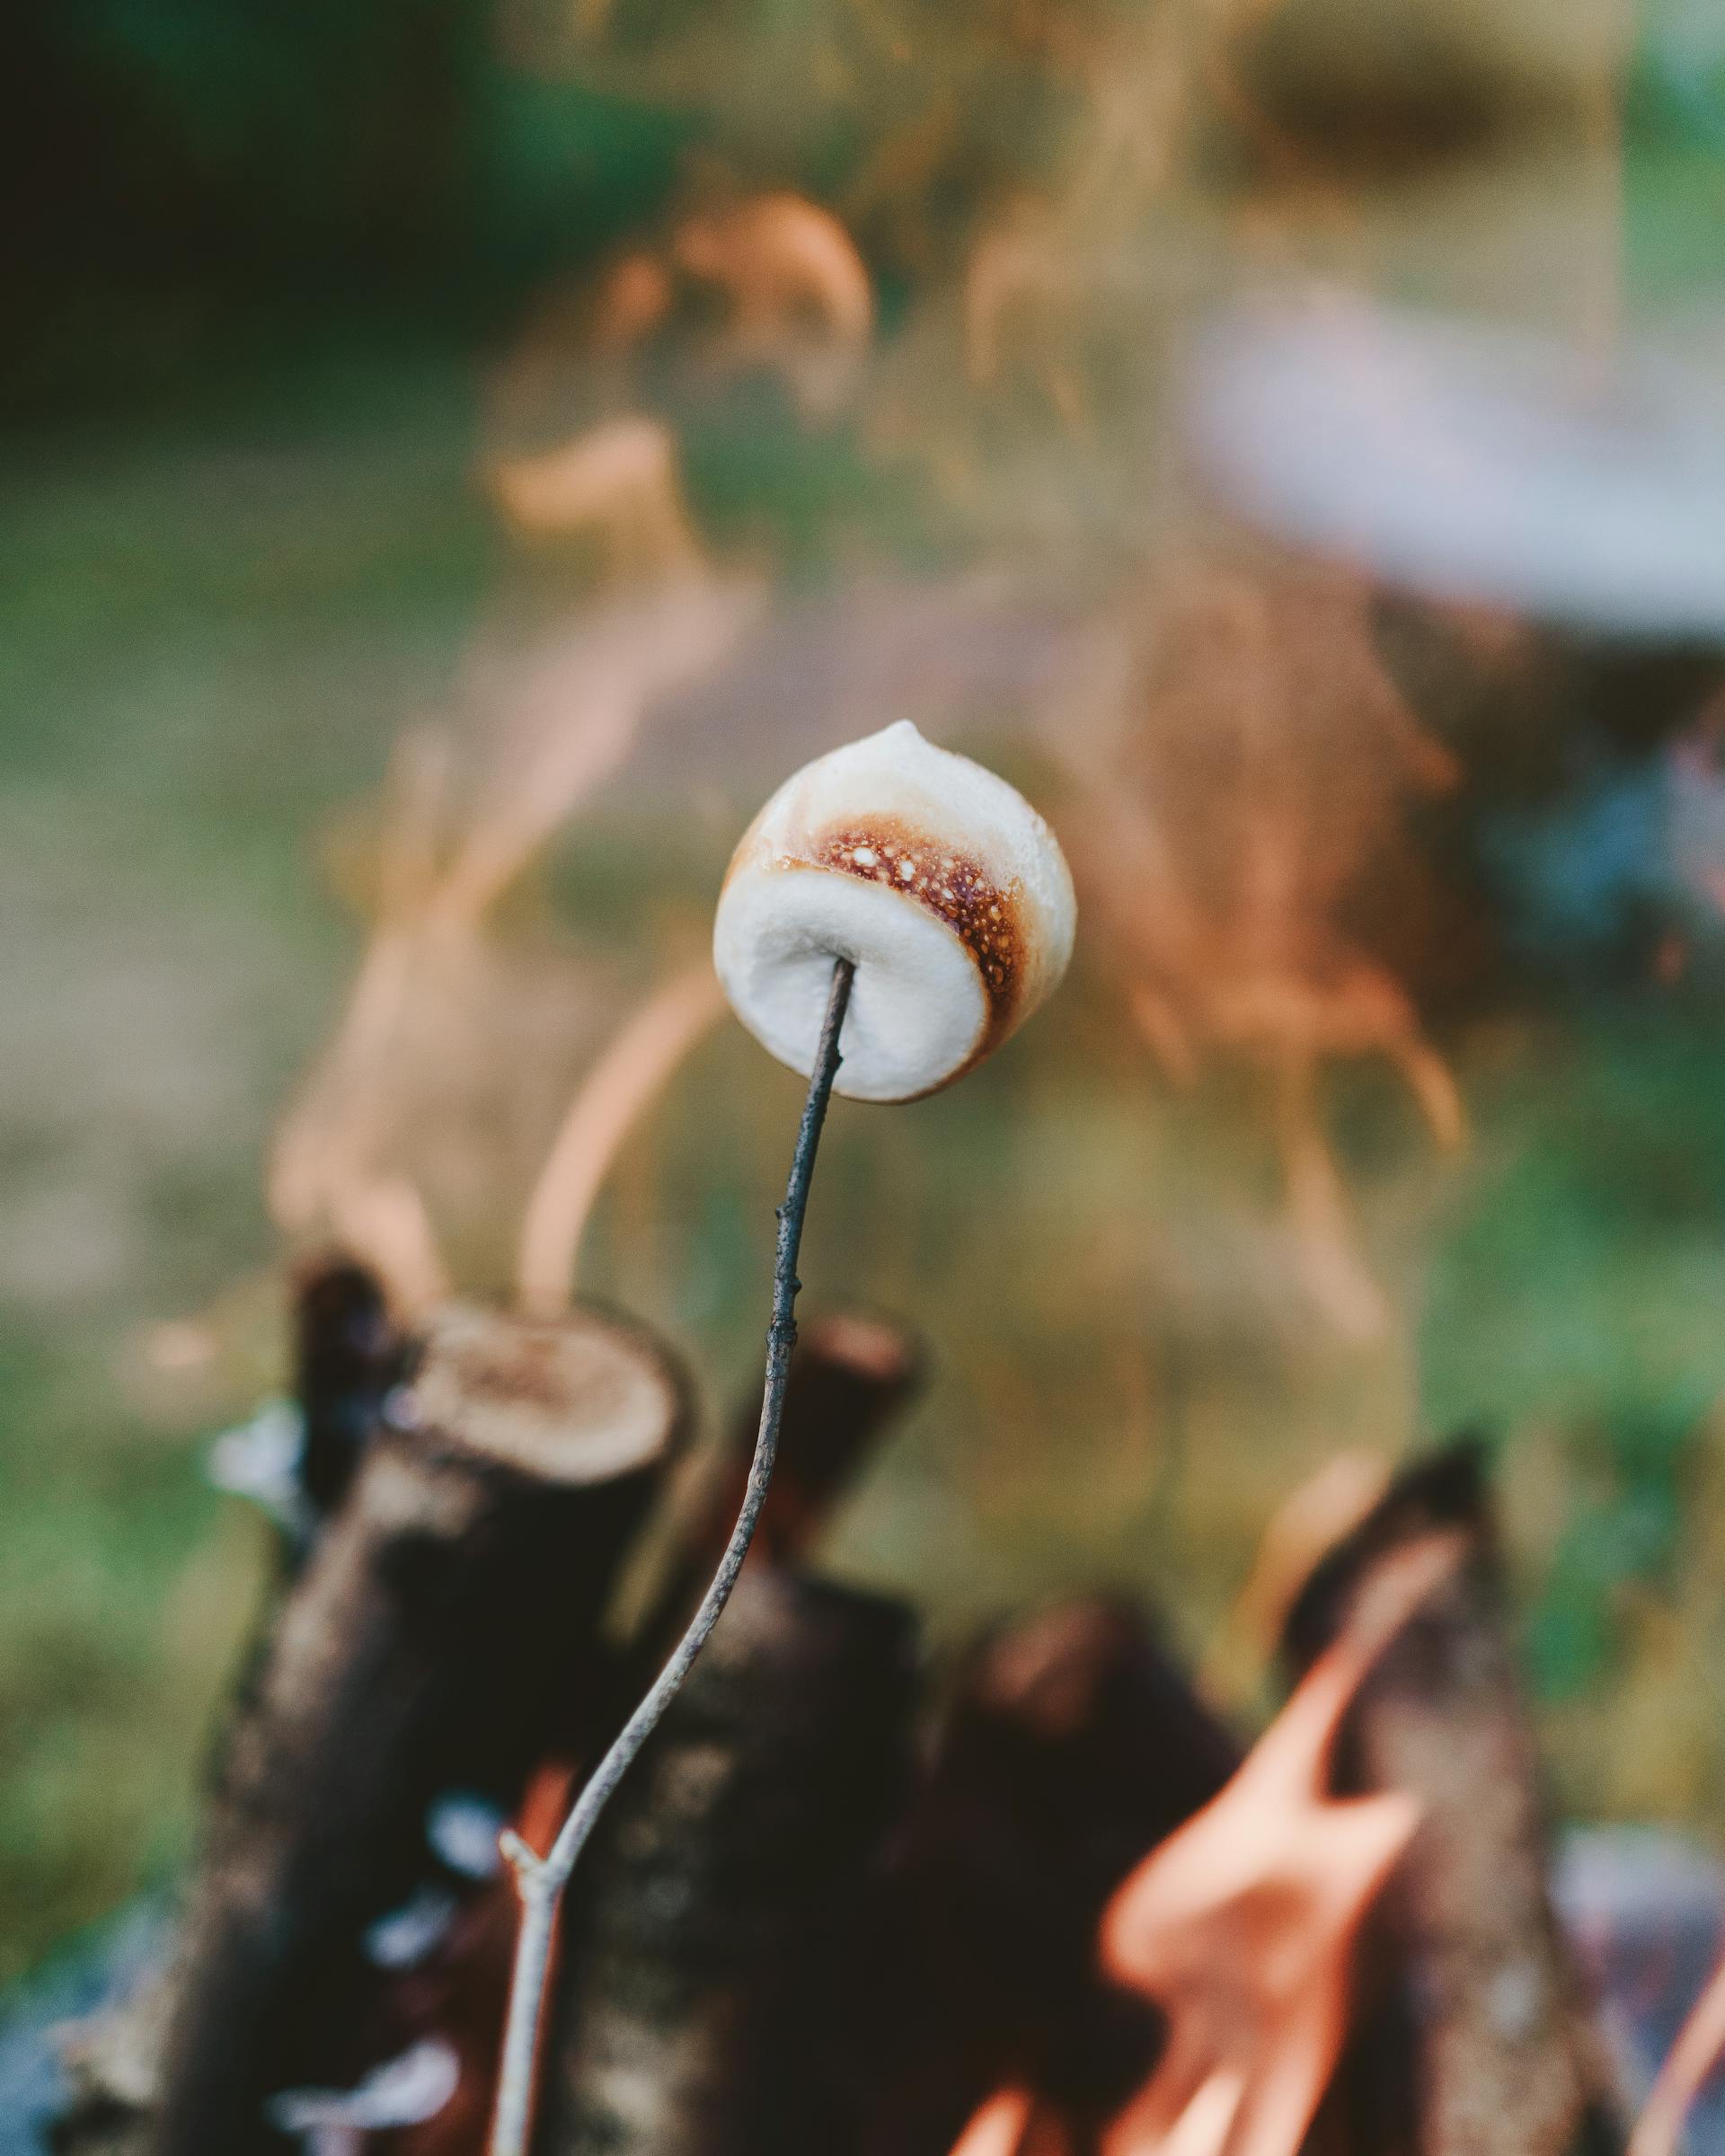 A marshmallow being roasted | Source: Pexels